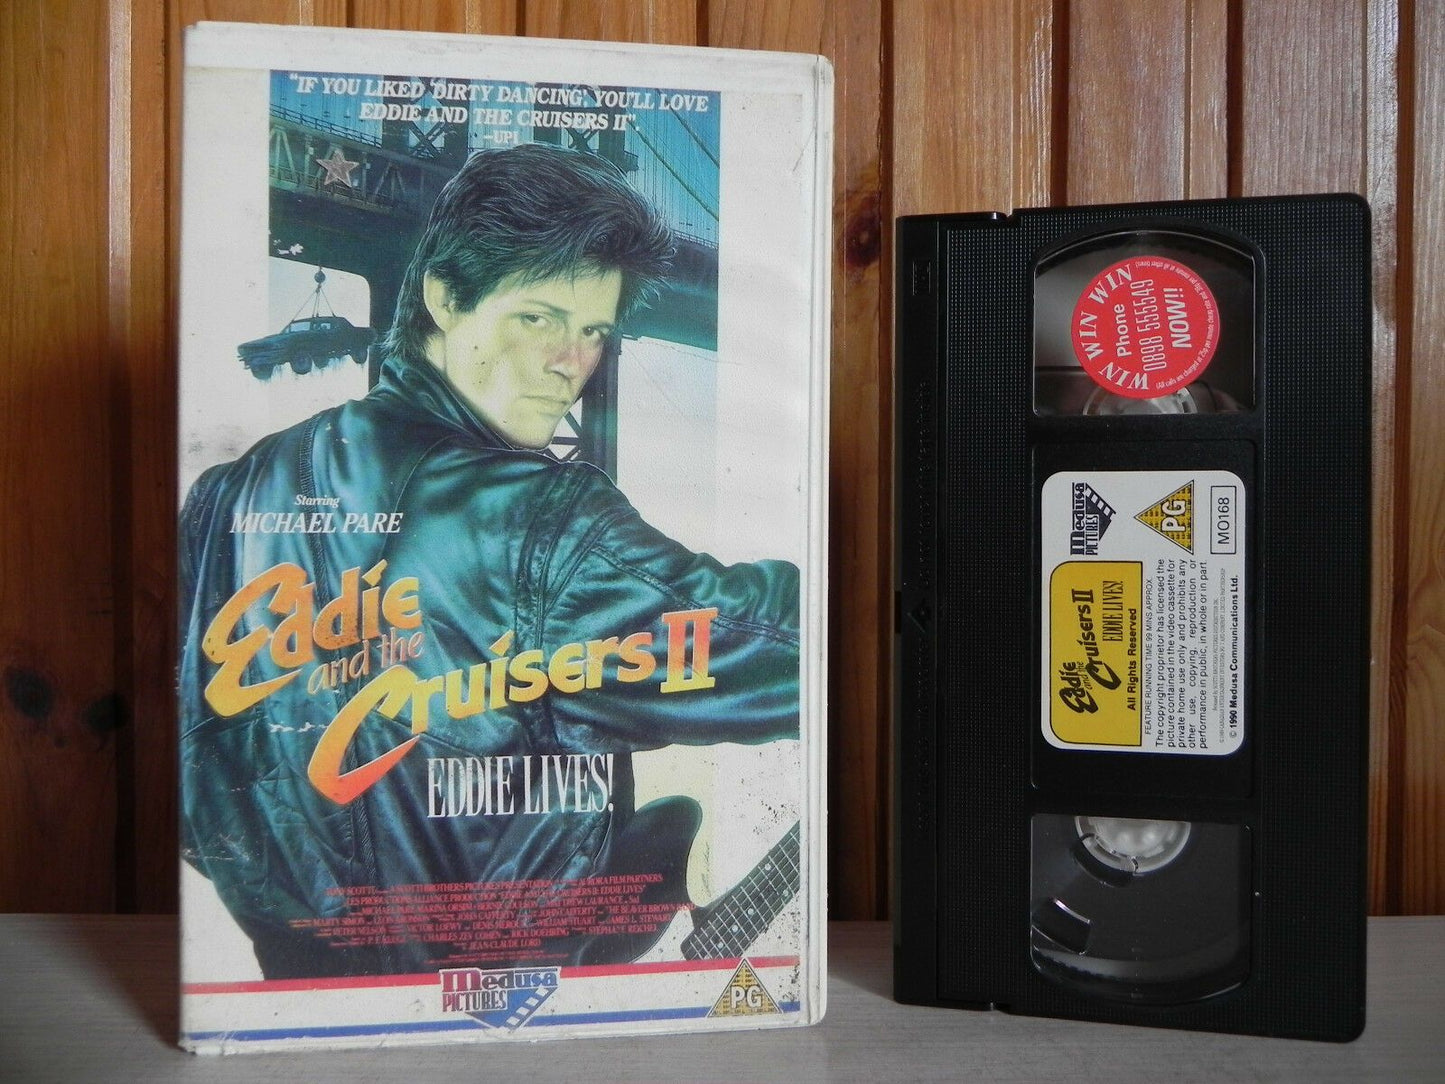 Eddie And The Cruisers 2 - Medusa Pictures - Musical - Large Box - Pal VHS-